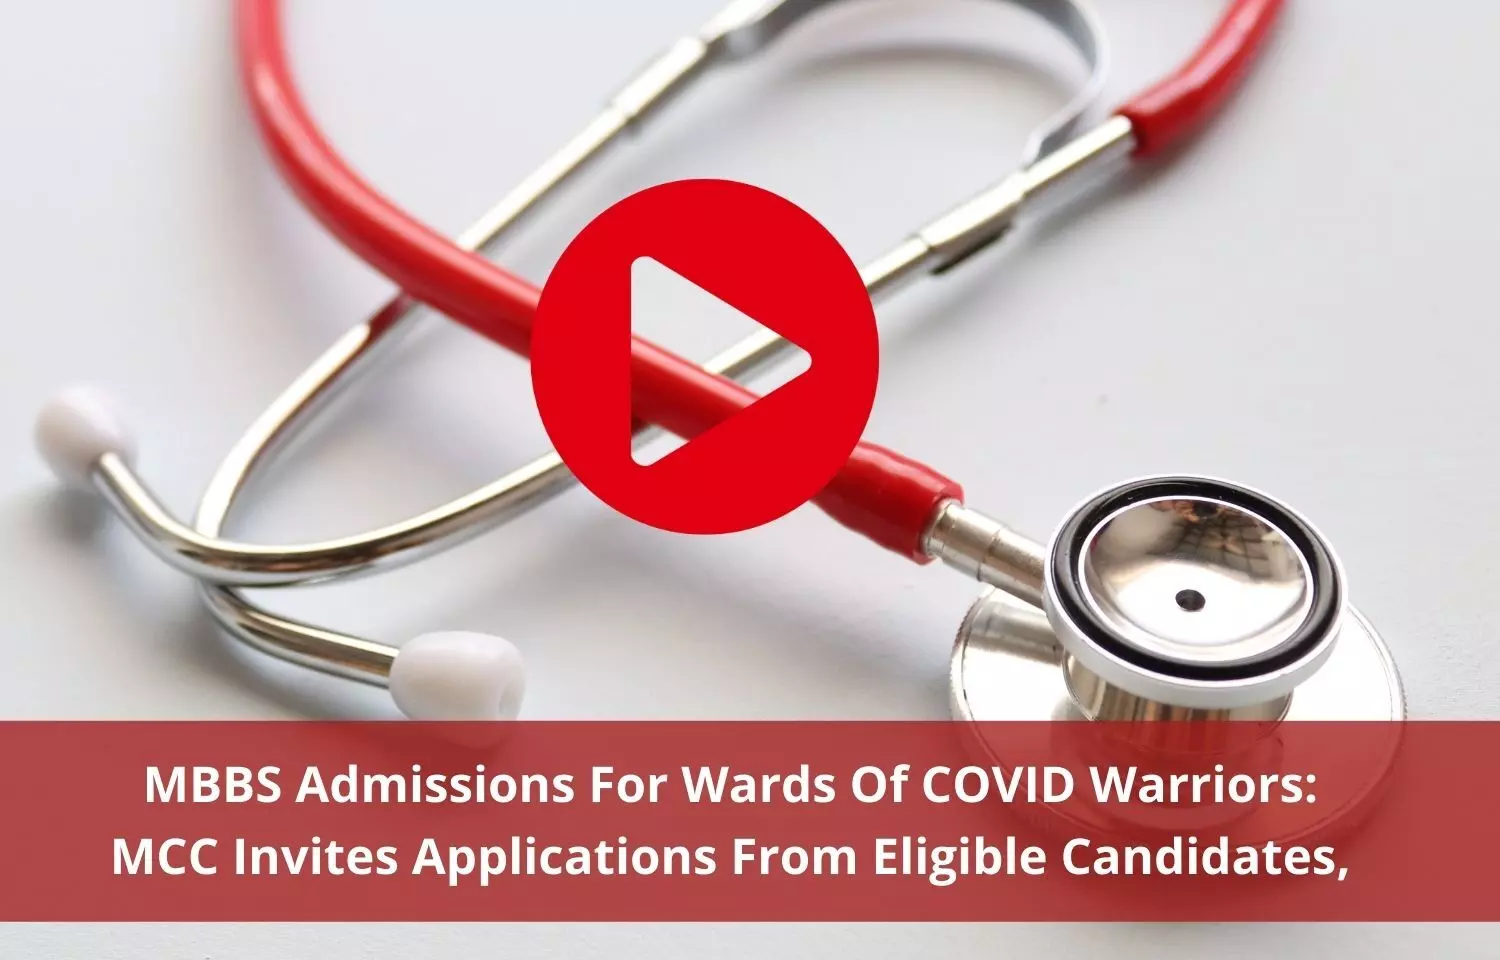 MCC invites applications for MBBS seats from children of COVID Warriors